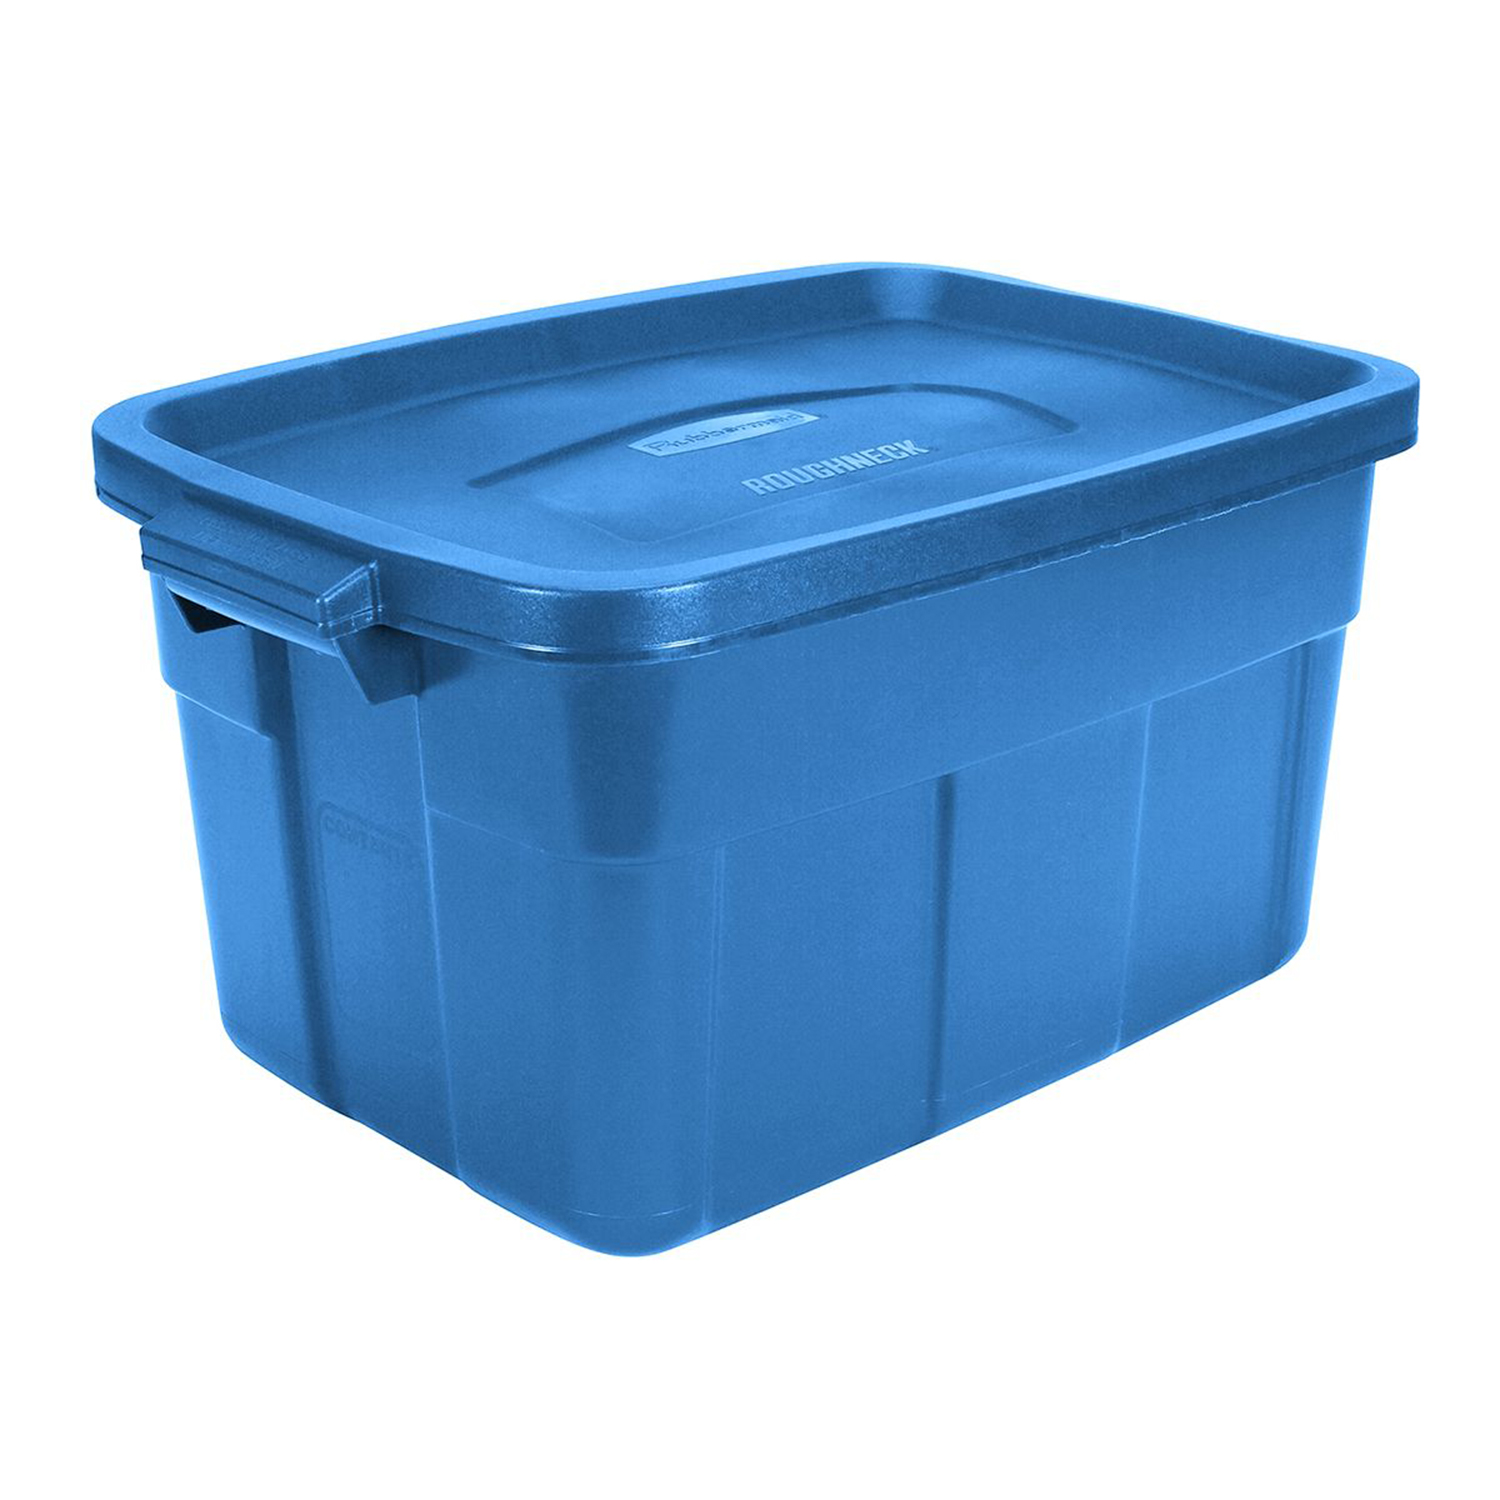 Rubbermaid Roughneck Tote 14 Gal Storage Container, Heritage Blue (6 Pack) - image 3 of 5